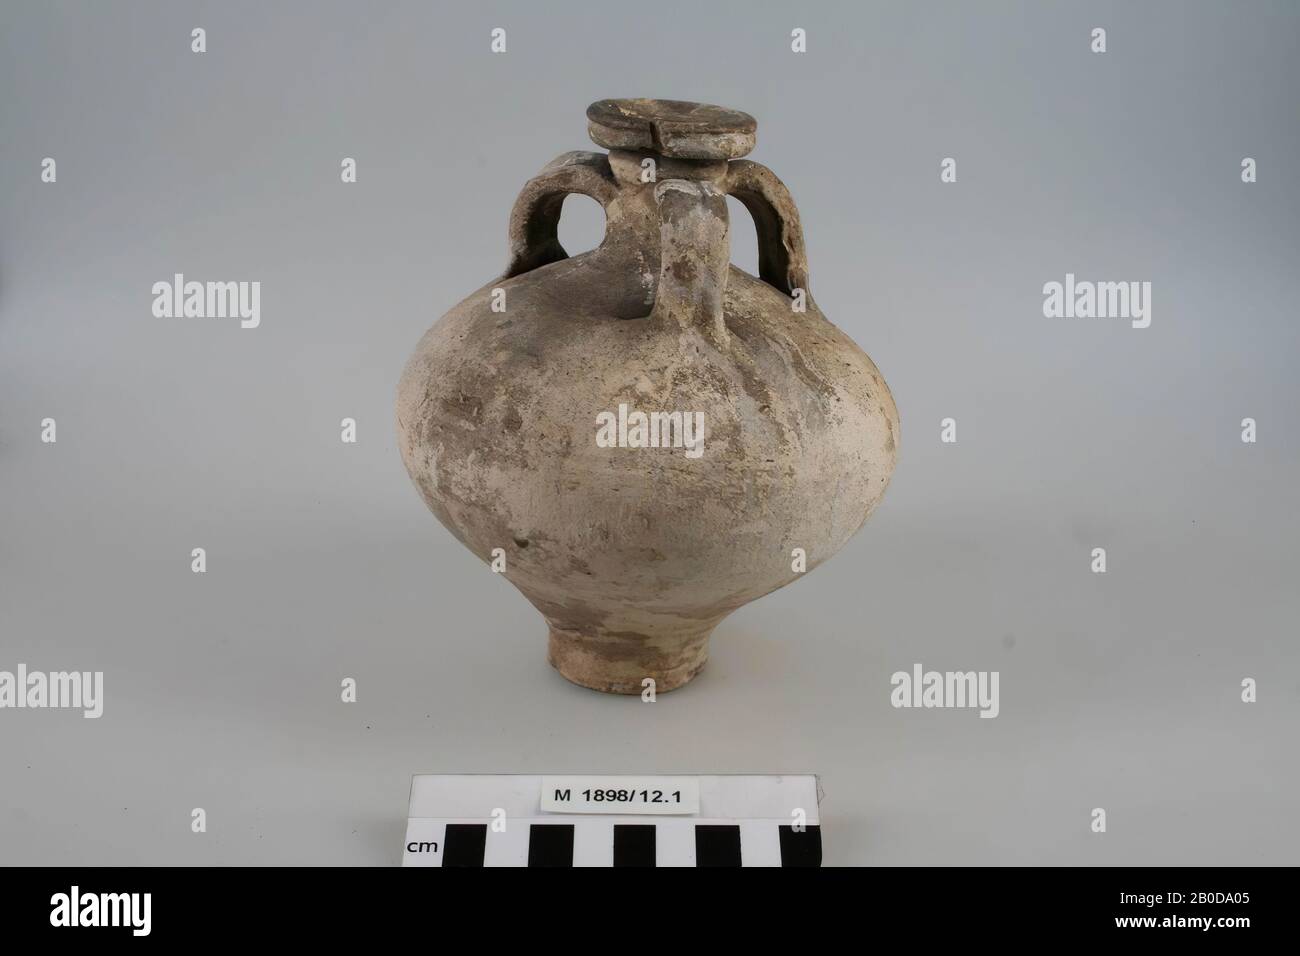 Jar on narrow foot with three ears. Part mouth adhered, surface fragile and let loose here and there., Jug, pottery, h: 16.5 cm, diam: 14.5 cm, Germany Stock Photo